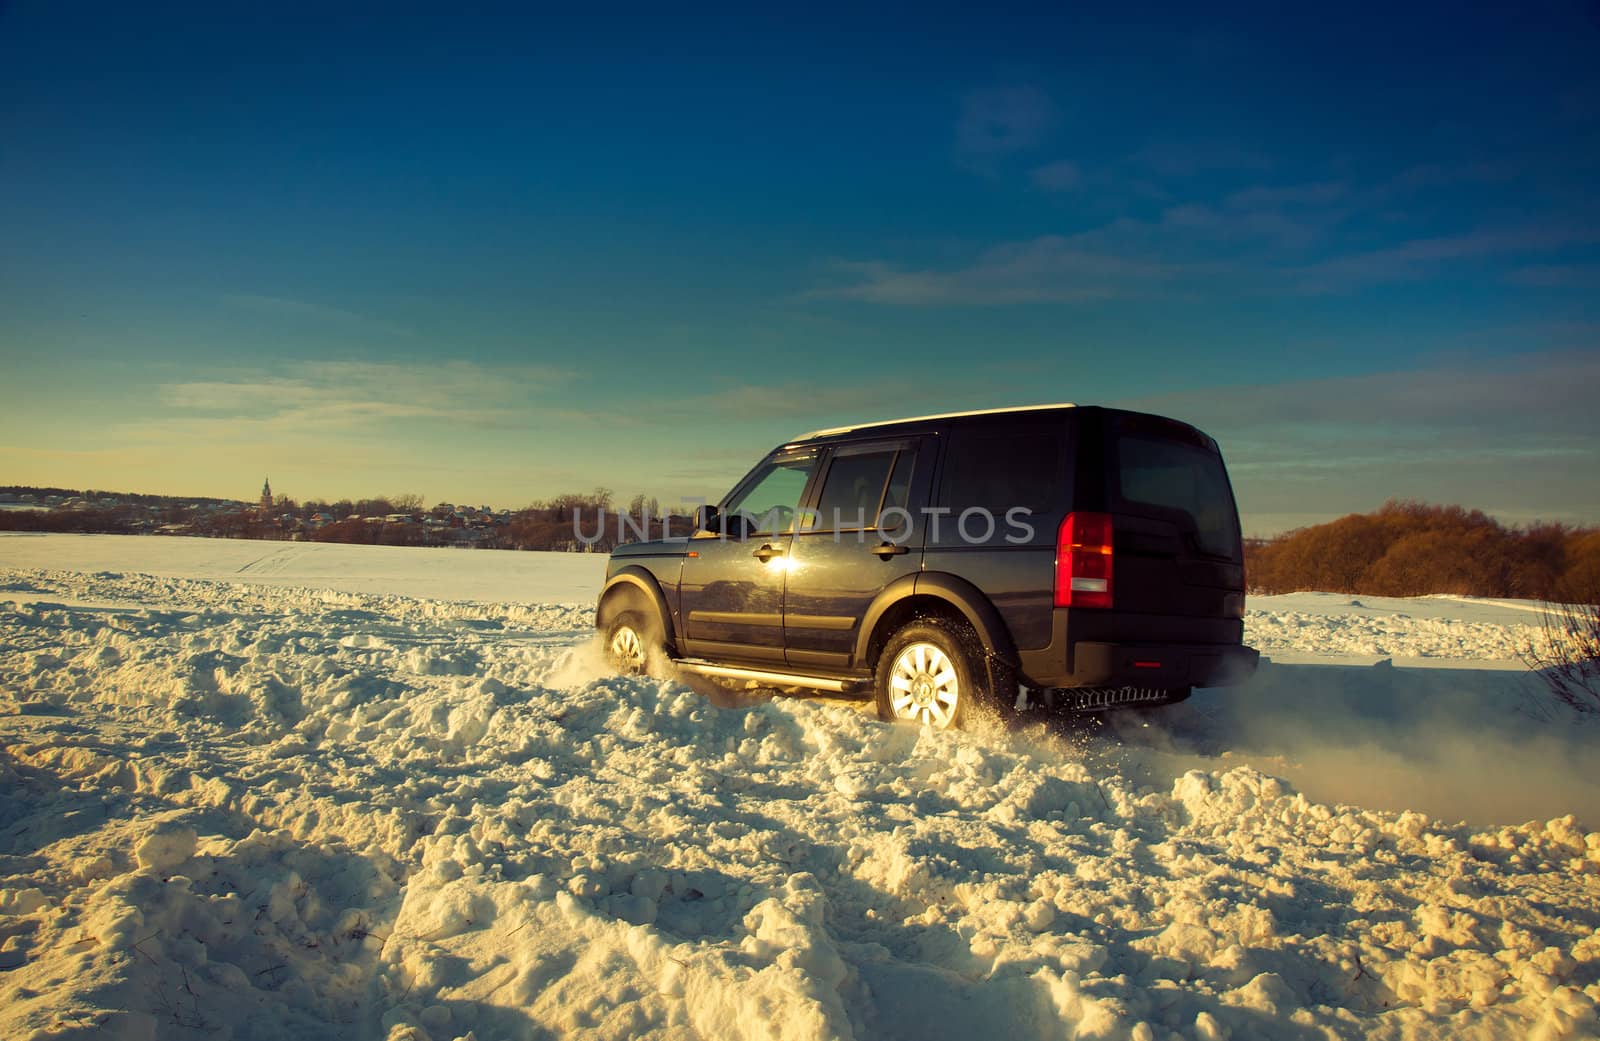 Land Rover Discovery suv
Car on background the Russian winter.
February 19, 2011